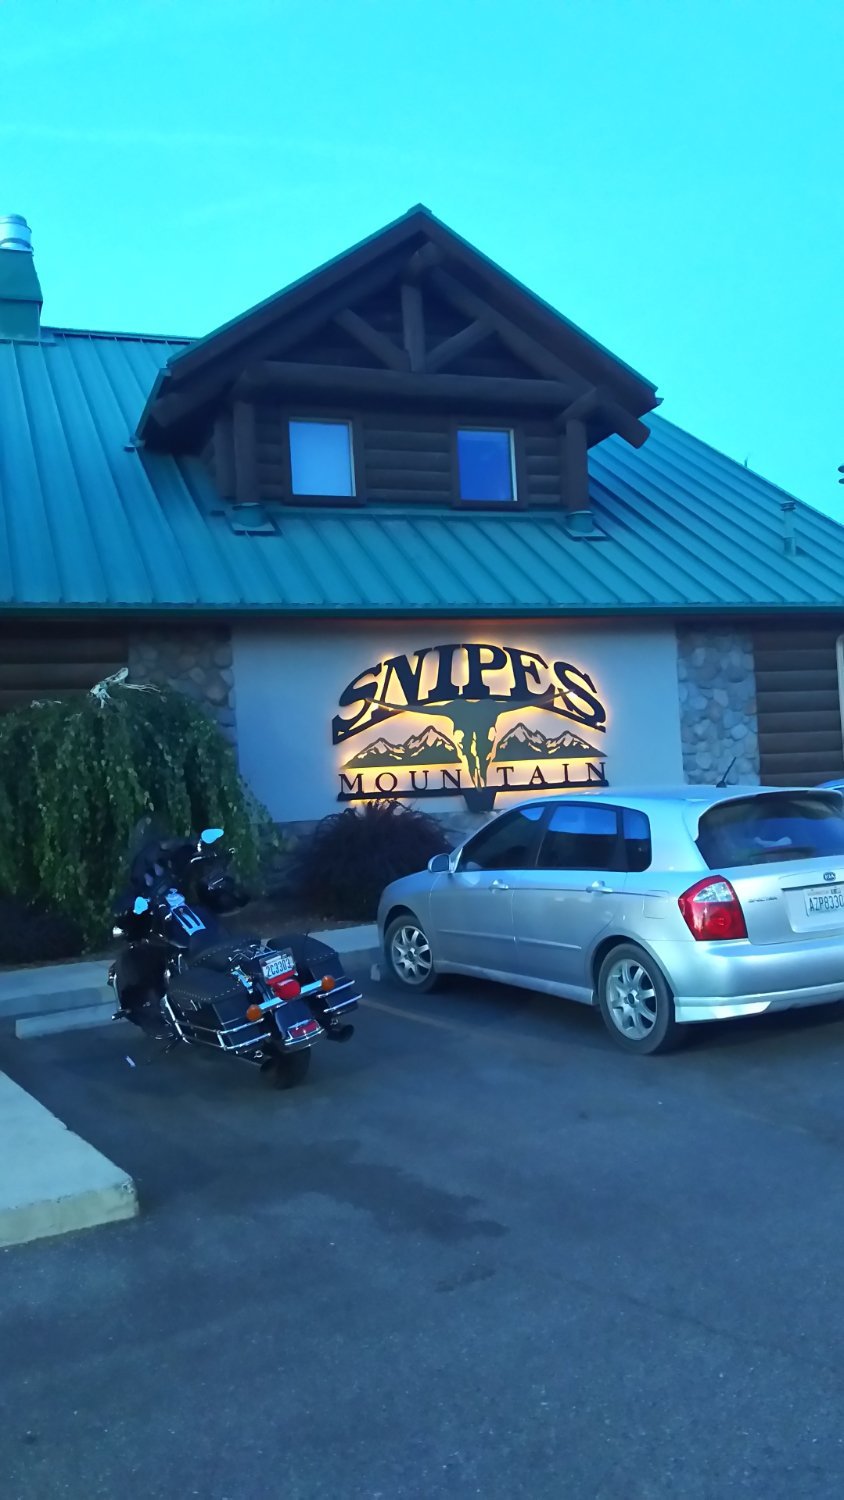 Snipes Mountain Brewery Inc